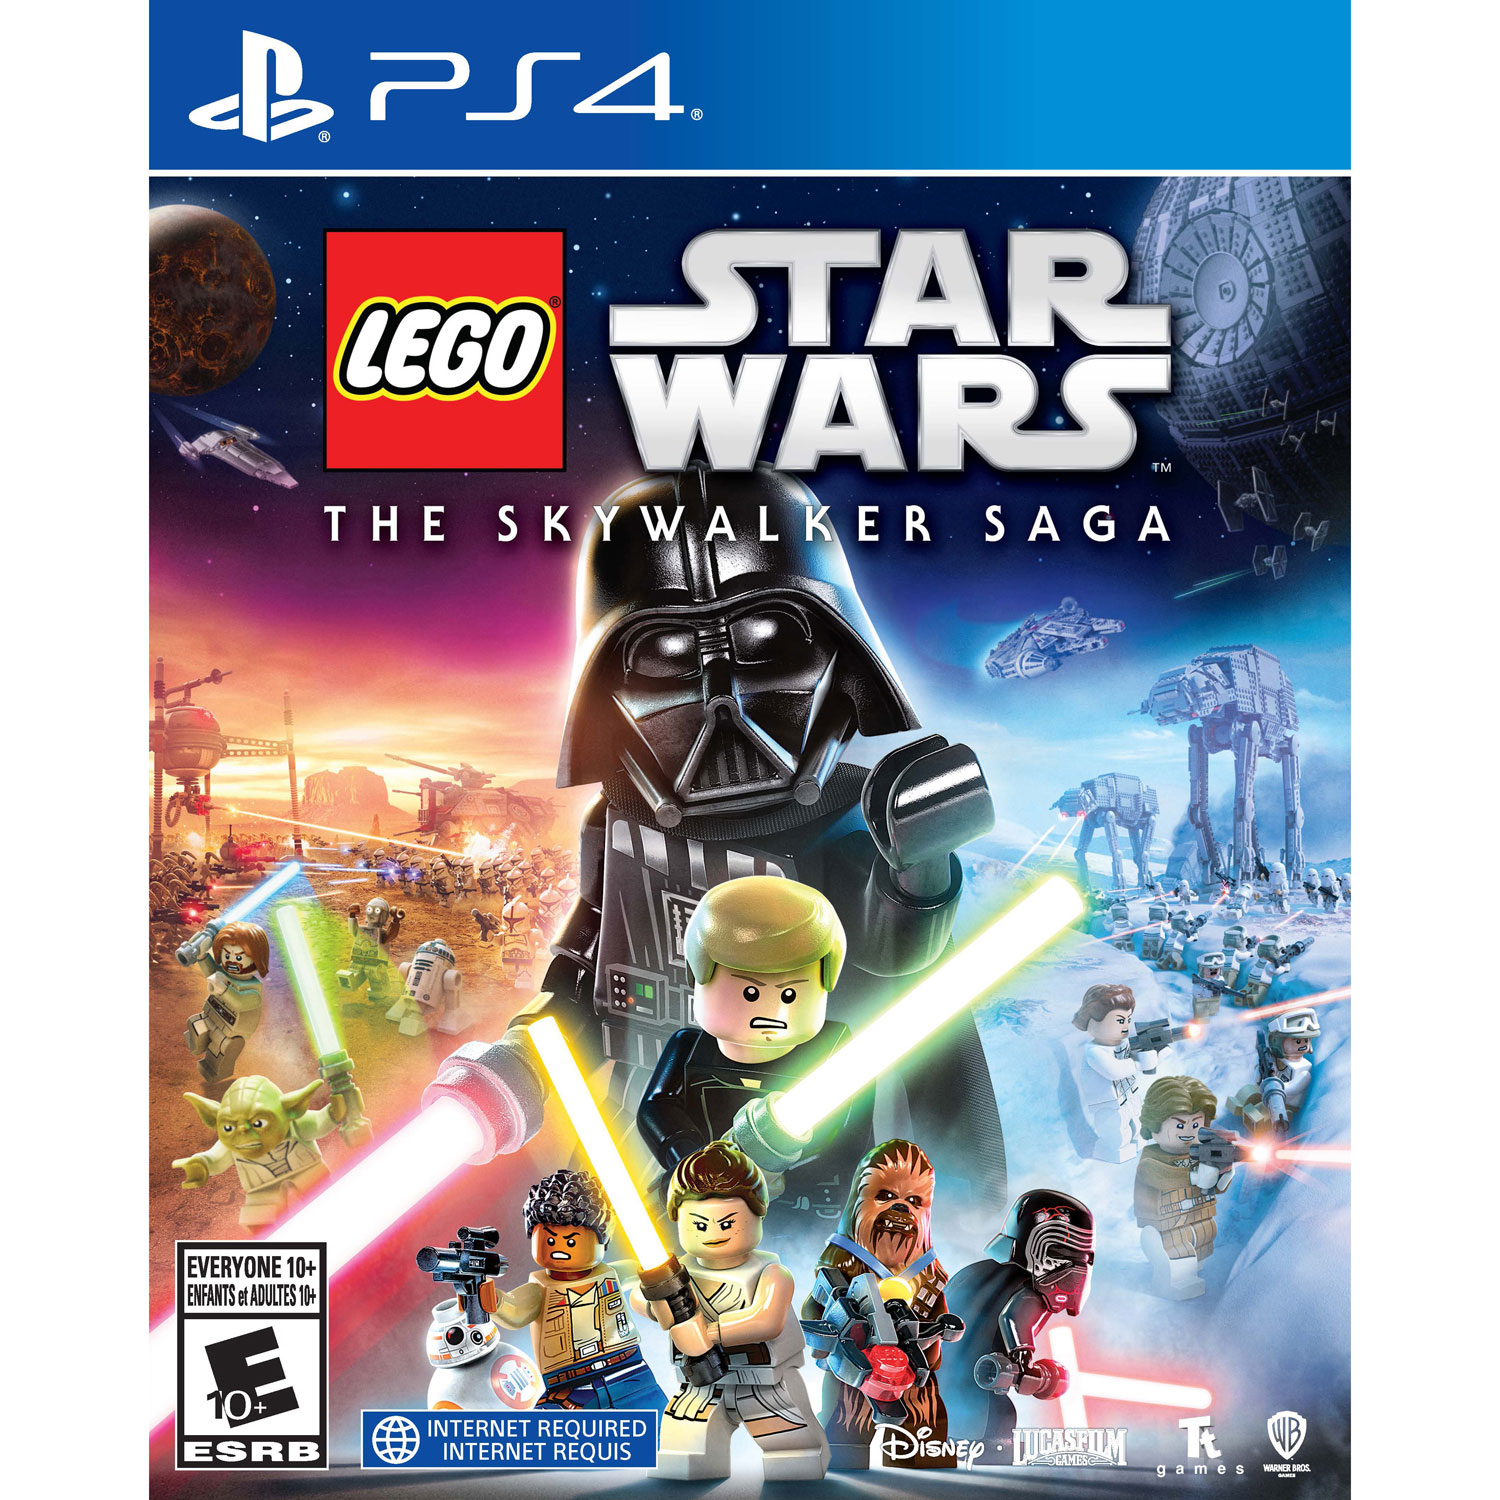 LEGO Star Wars: The Skywalker Saga (PS4) with Steelbook - Only at Best Buy